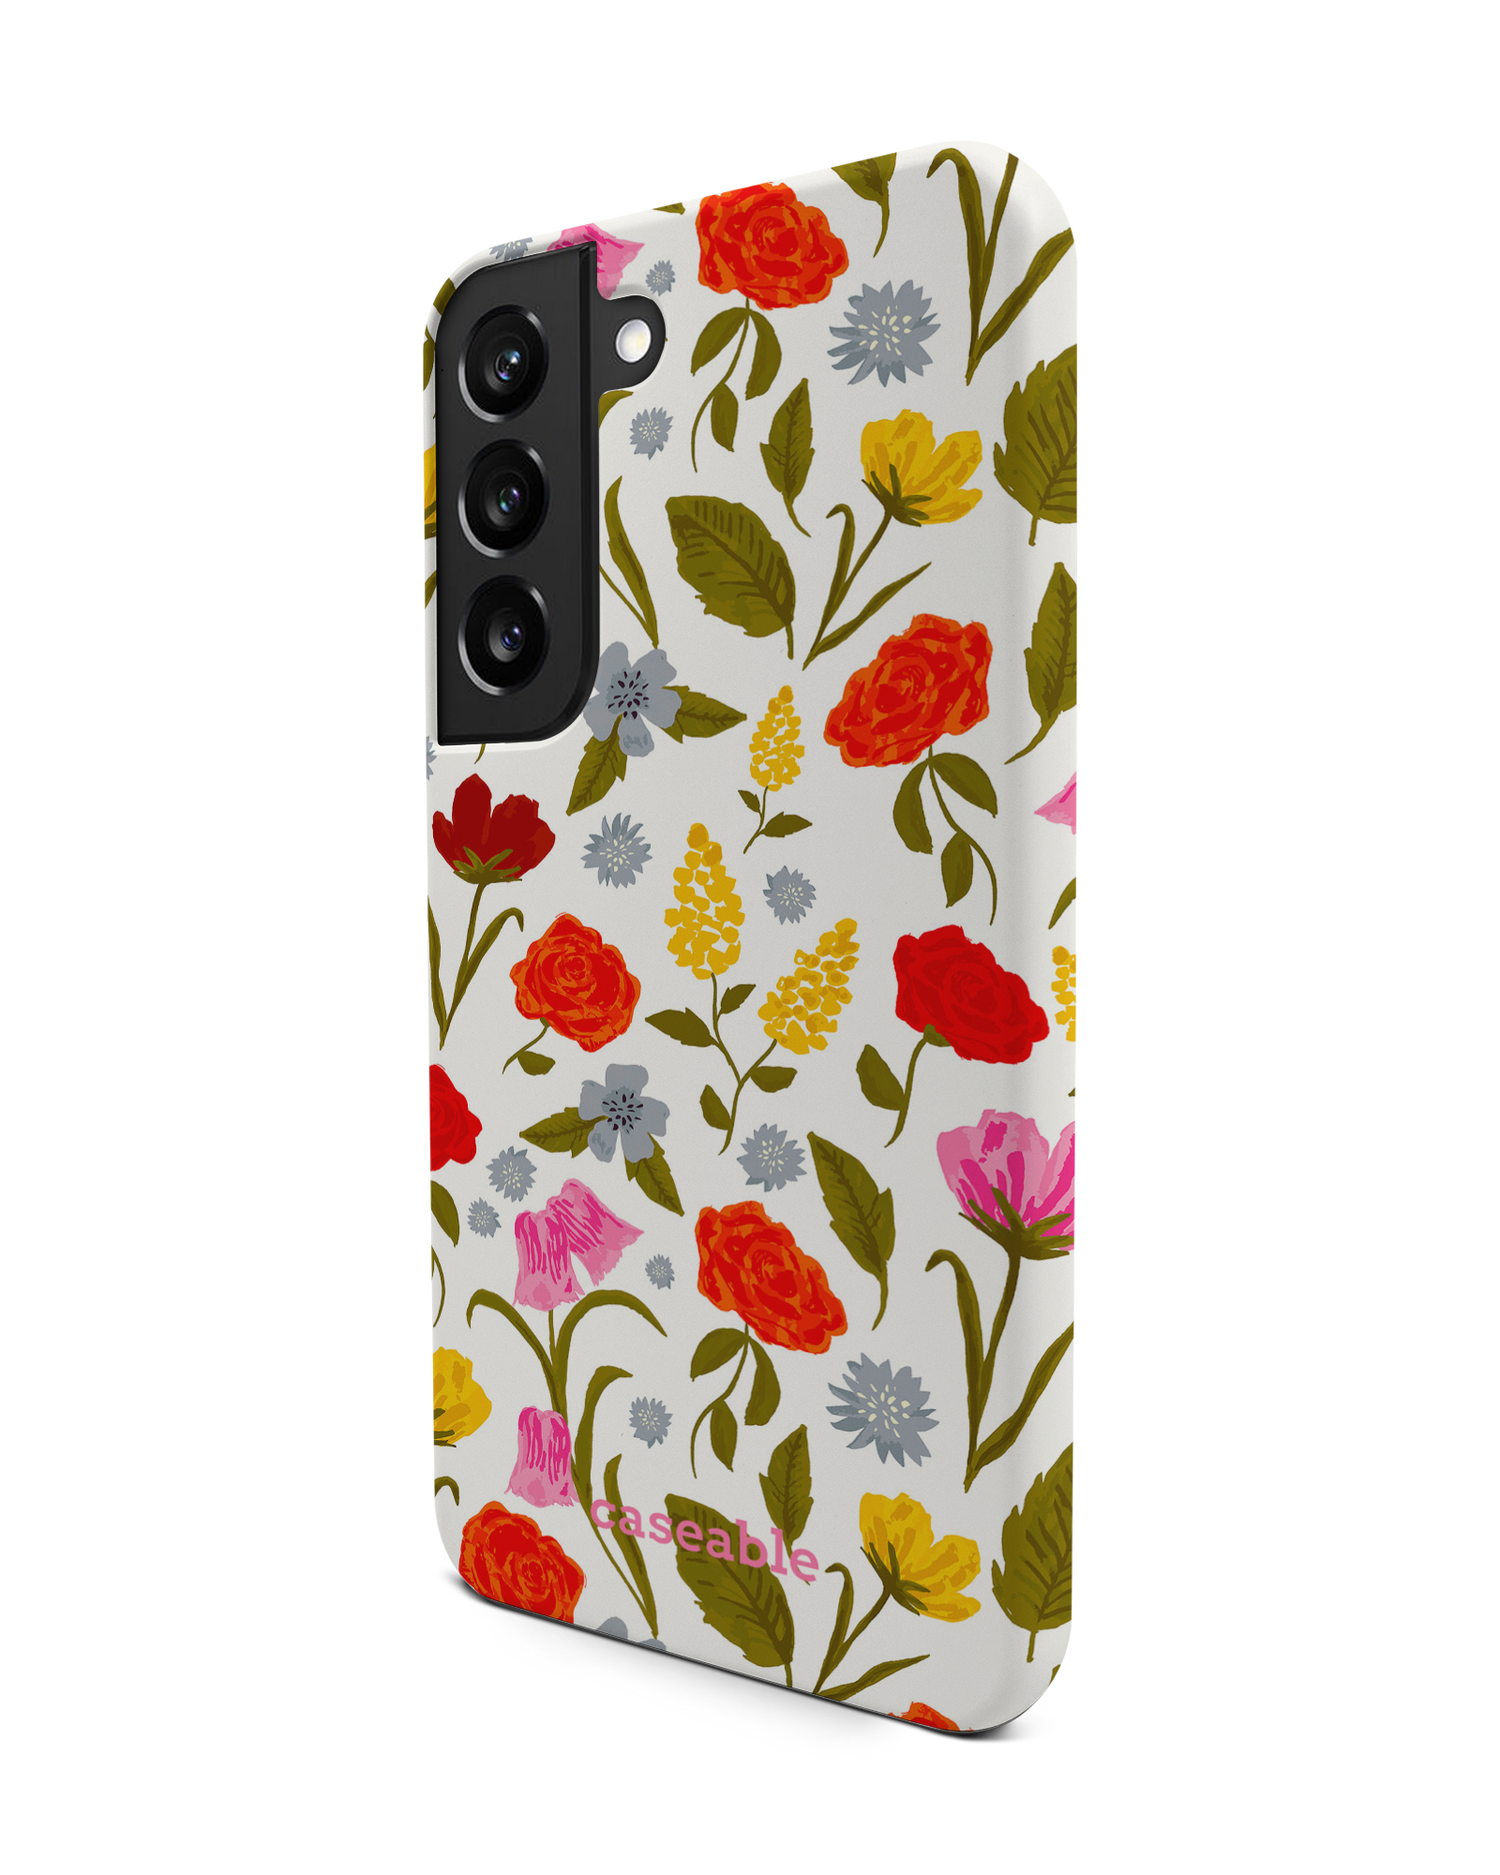 Botanical Beauties Premium Phone Case Samsung Galaxy S22 5G: View from the right side